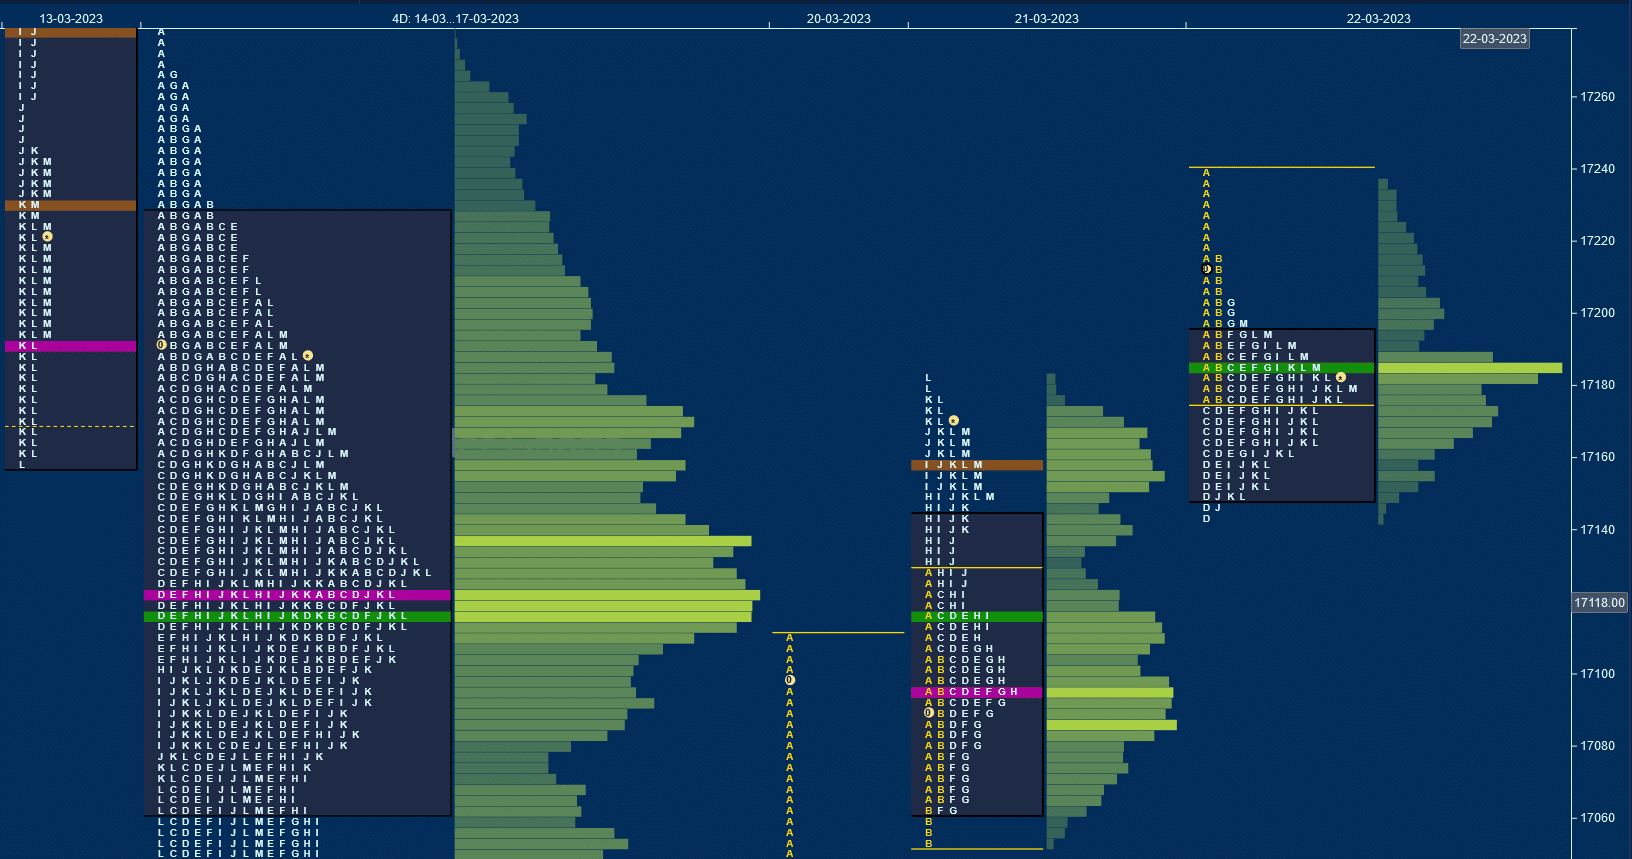 Nf 14 Market Profile Analysis Dated 22Nd Mar 2023 Banknifty Futures, Charts, Day Trading, Intraday Trading, Intraday Trading Strategies, Market Profile, Market Profile Trading Strategies, Nifty Futures, Order Flow Analysis, Support And Resistance, Technical Analysis, Trading Strategies, Volume Profile Trading